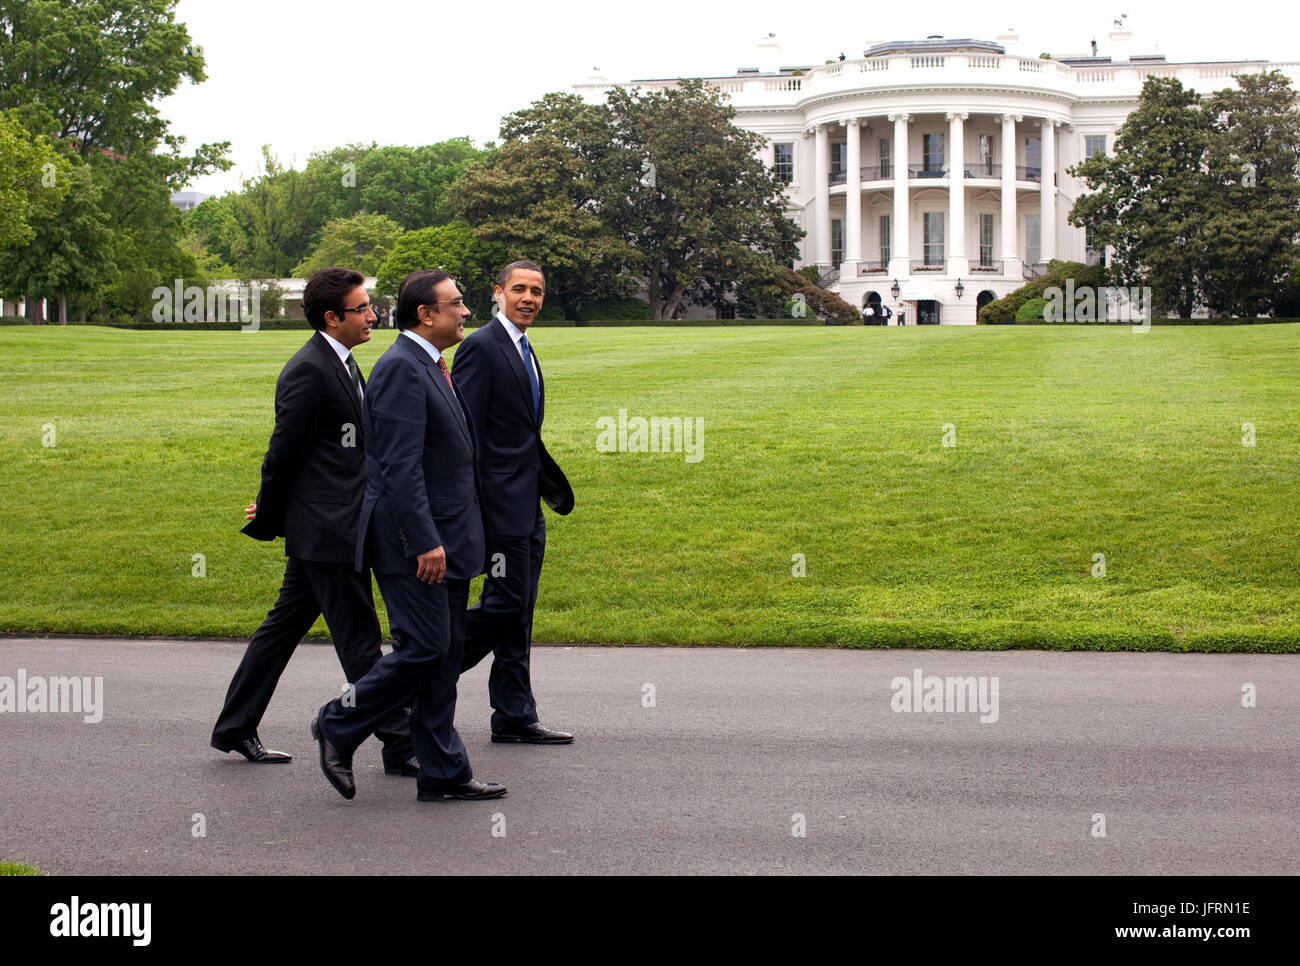 President Obama and Pakistan President Asif Ali Zardari walk around the South Lawn of the White House prior to US-Afghan-PakistanTrilateral meeting  May 6, 2009.  This official White House photograph is being made available for publication by news organizations and/or for personal use printing by the subject(s) of the photograph. The photograph may not be manipulated in any way or used in materials, advertisements, products, or promotions that in any way suggest approval or endorsement of the President, the First Family, or the White House. Stock Photo